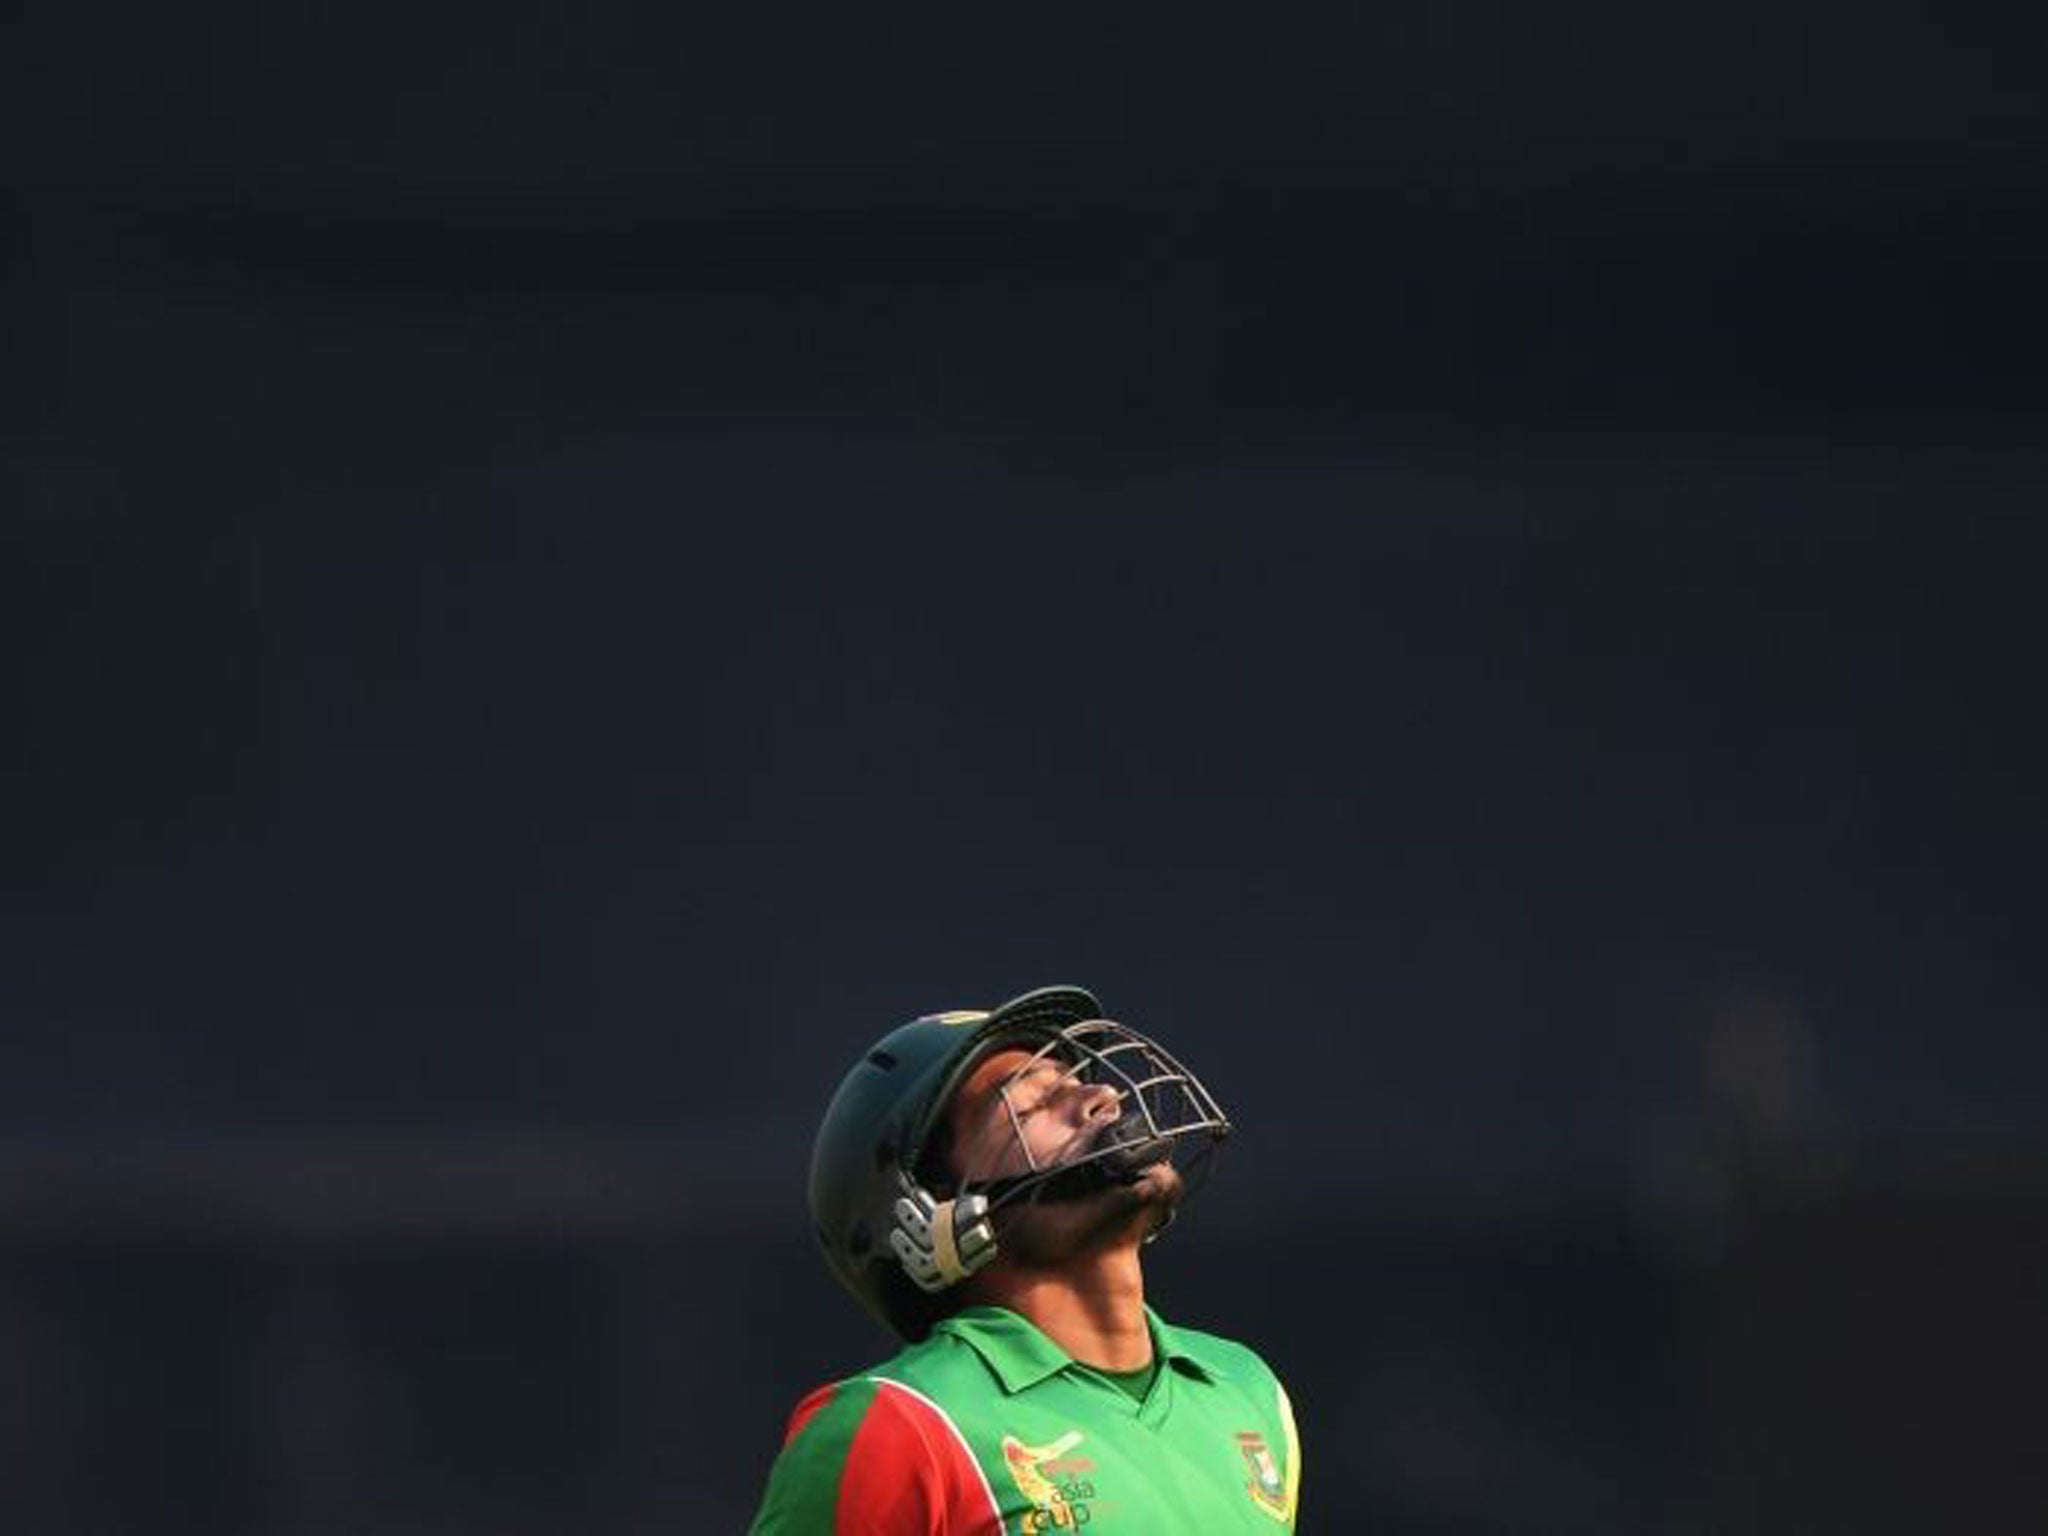 Bangladeshi captain Mushfiqur Rahim reacts as he walks back to the dressing room after losing his wicket